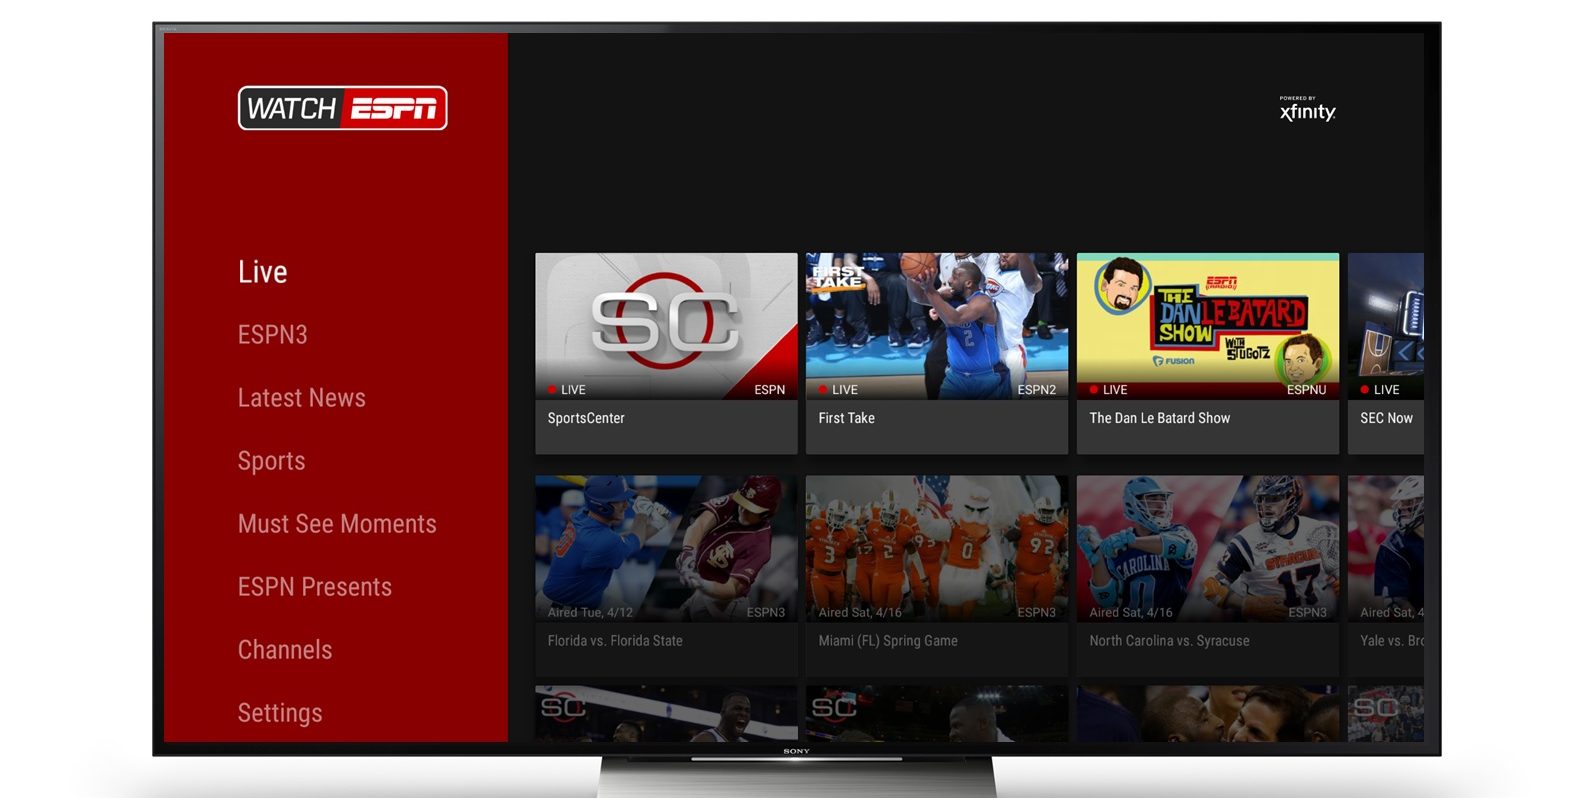 New ESPN app will let subscribers stream live sporting events on Android TV, new Nexus Players